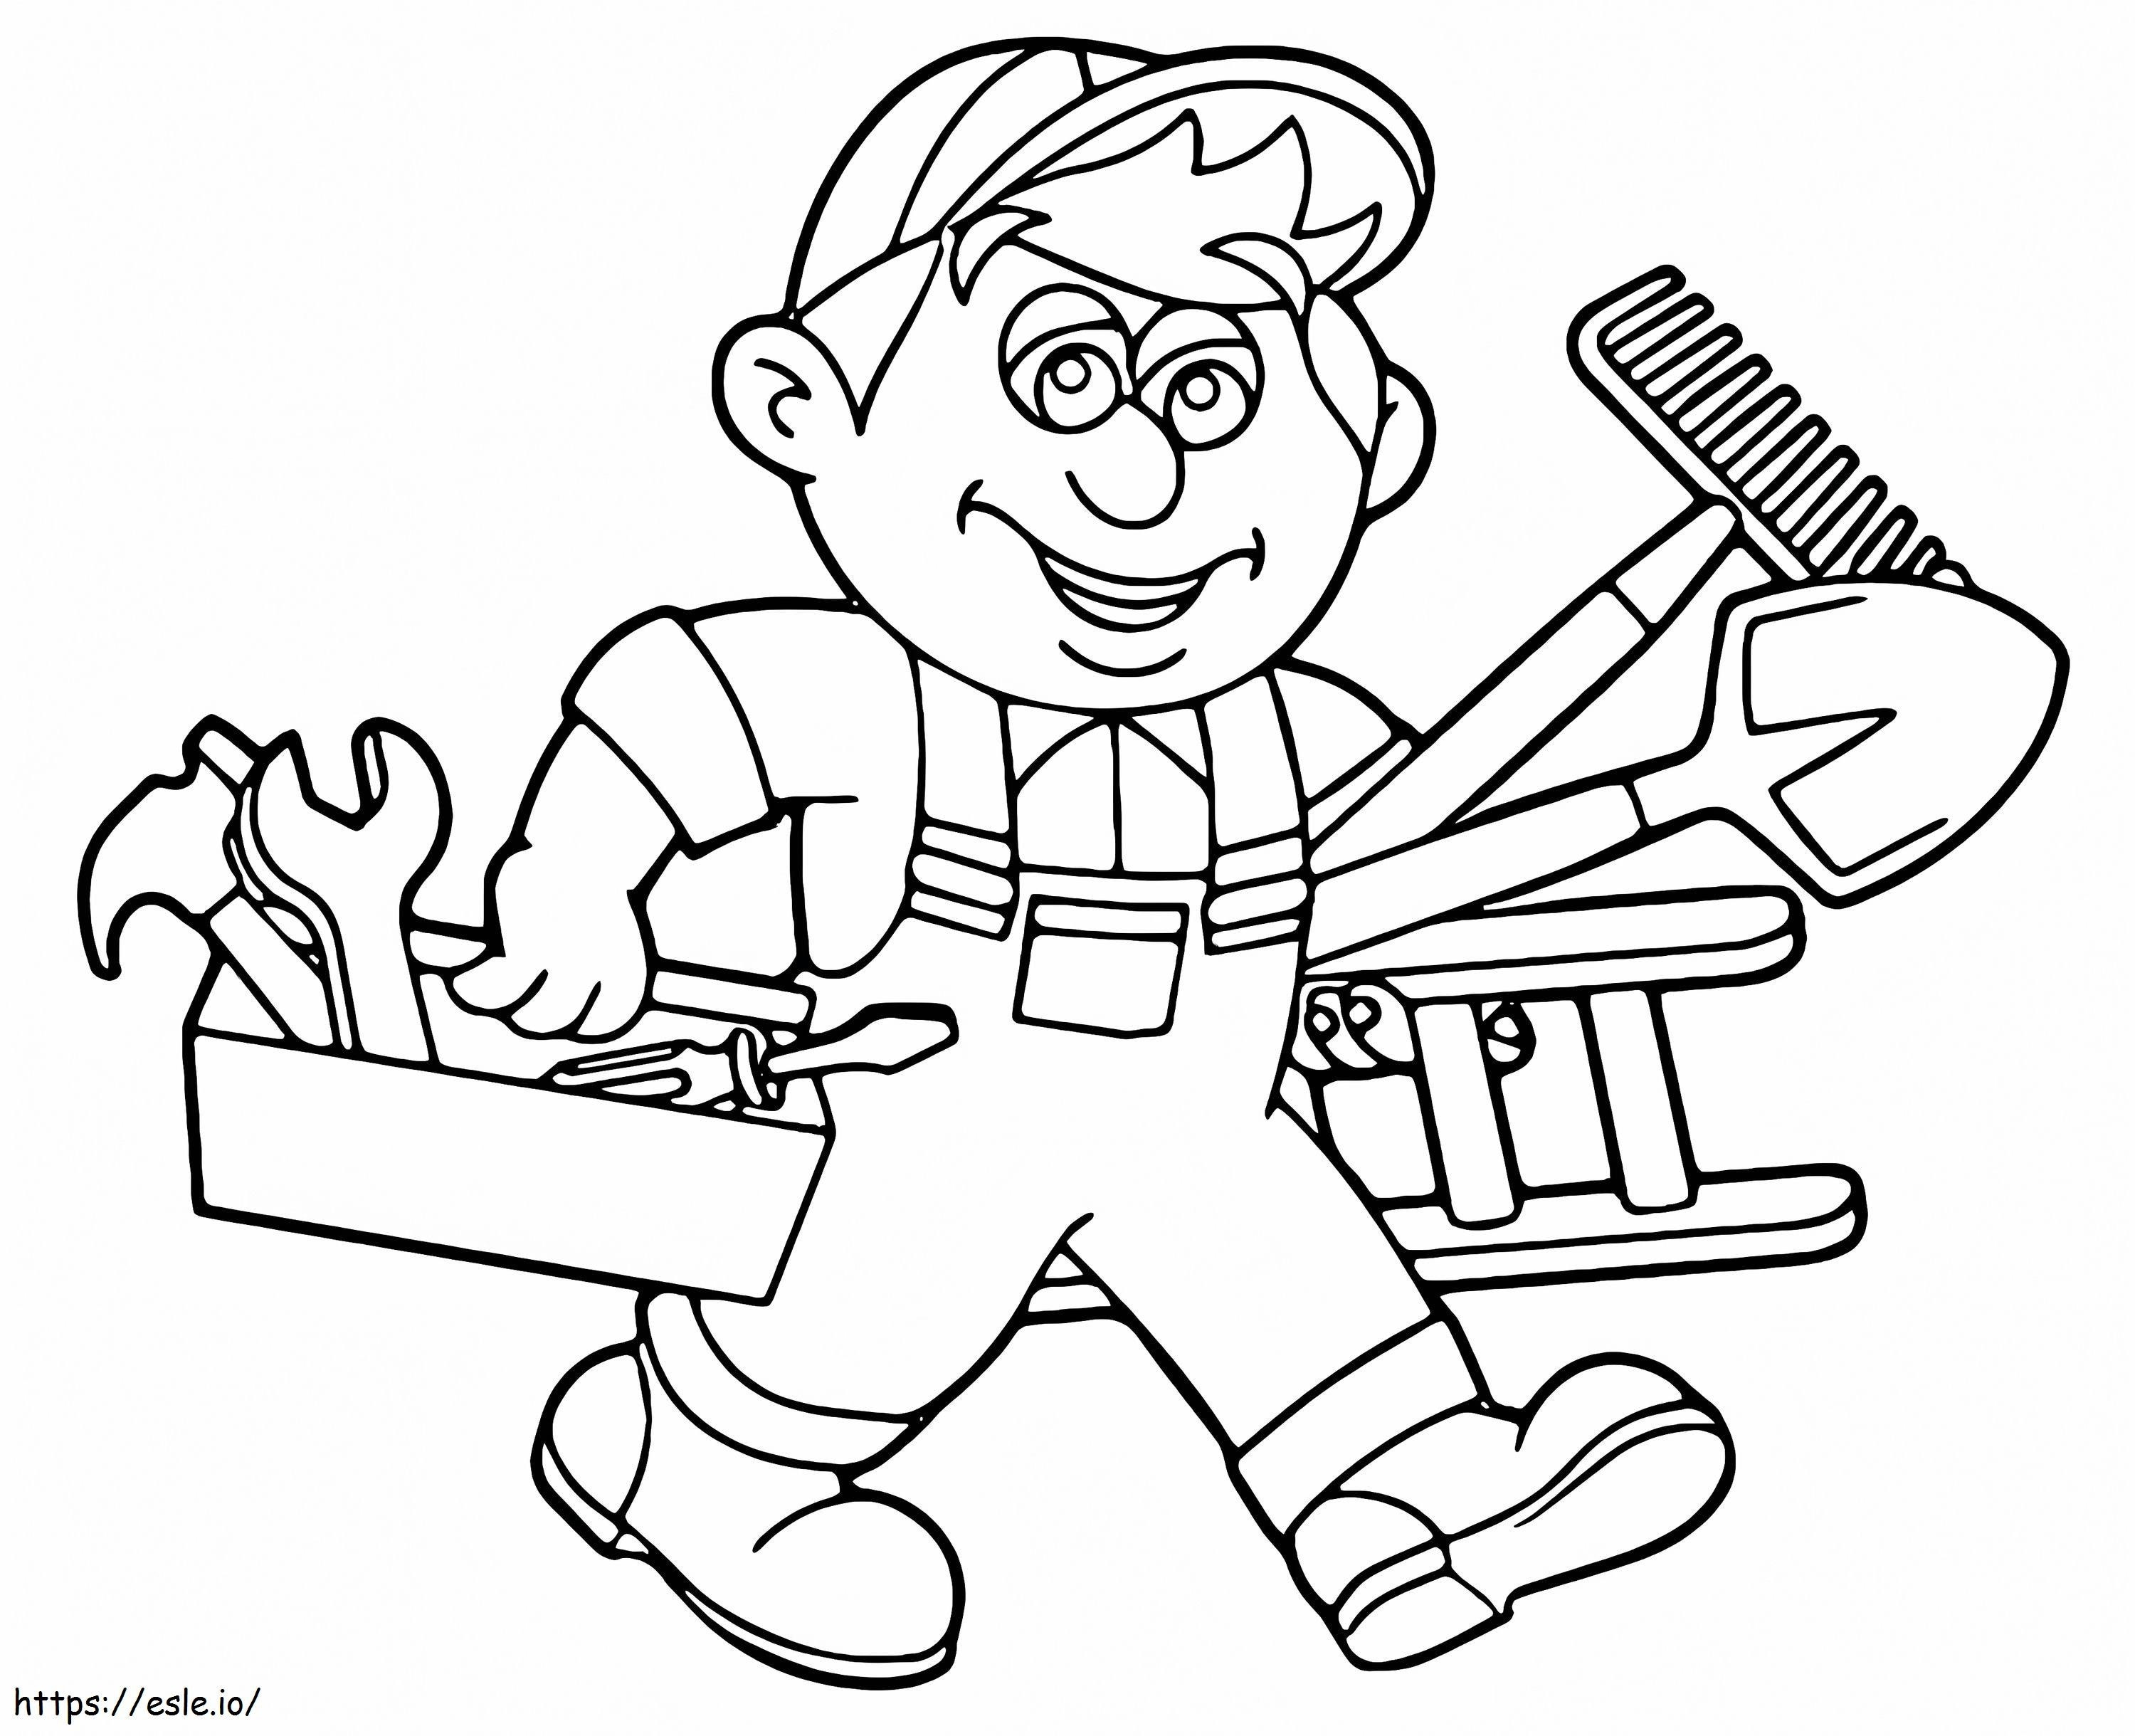 Carpenter And Tools coloring page